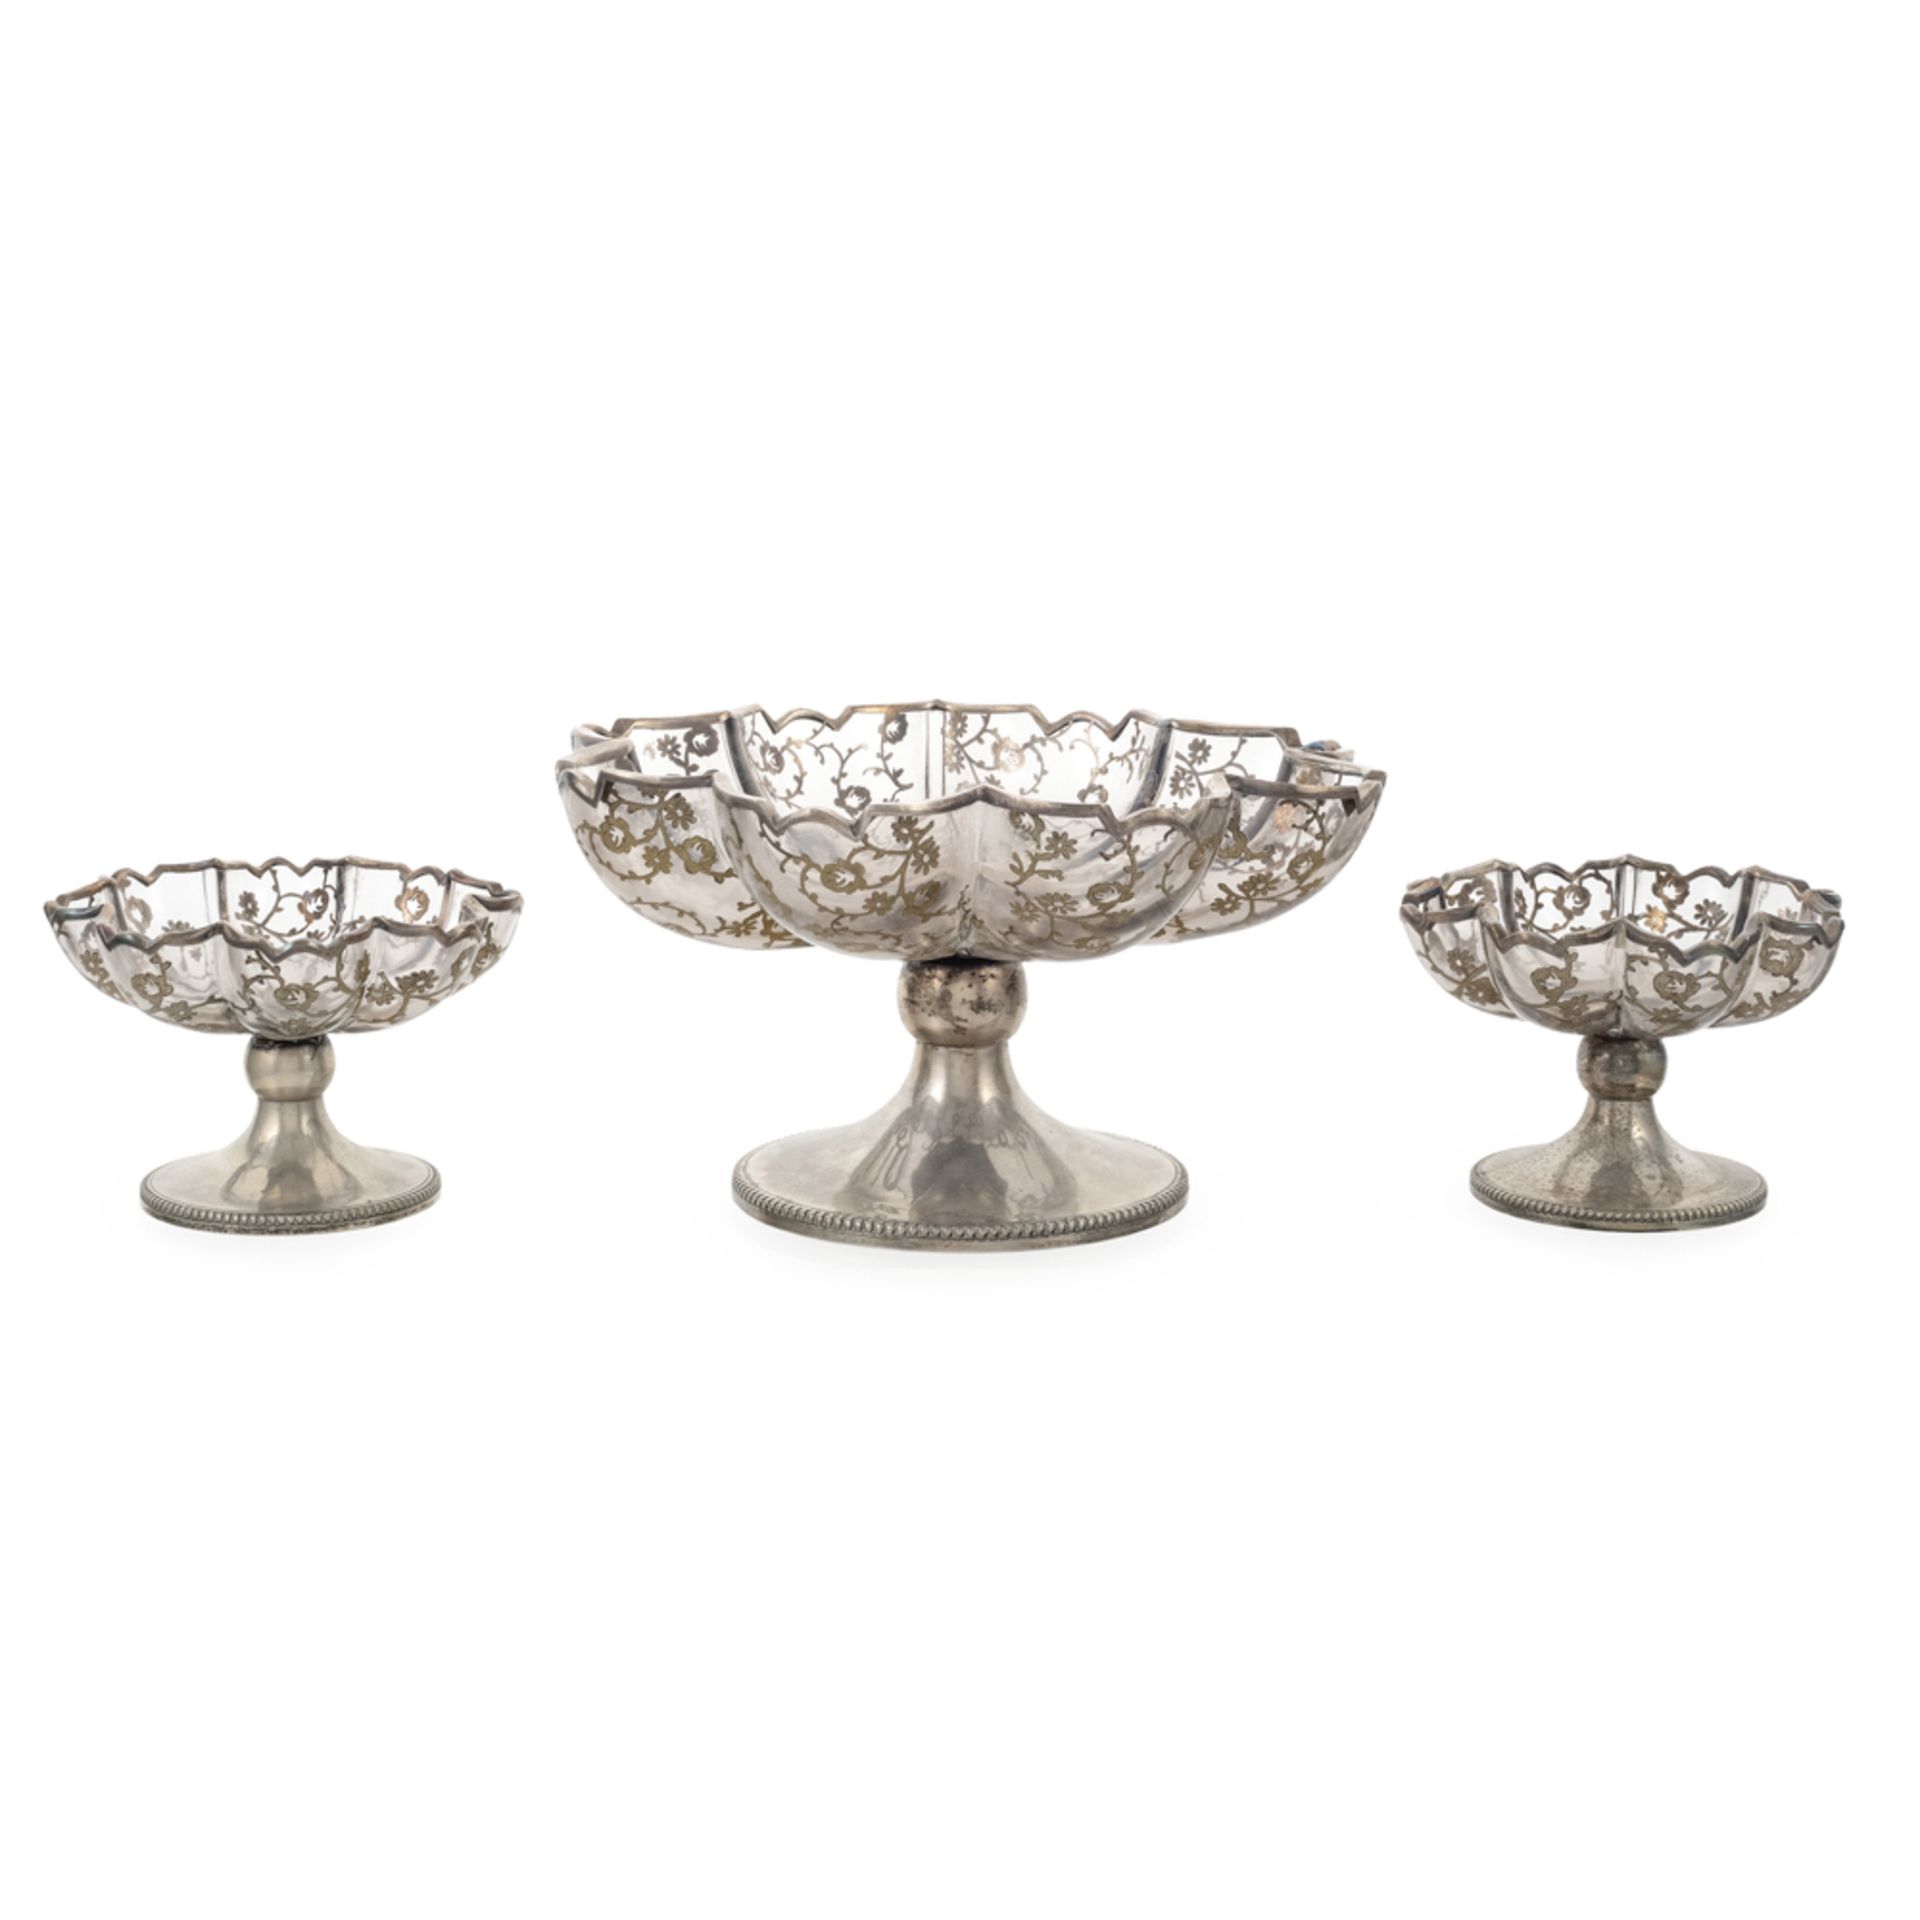 Silver and glass table set (7)